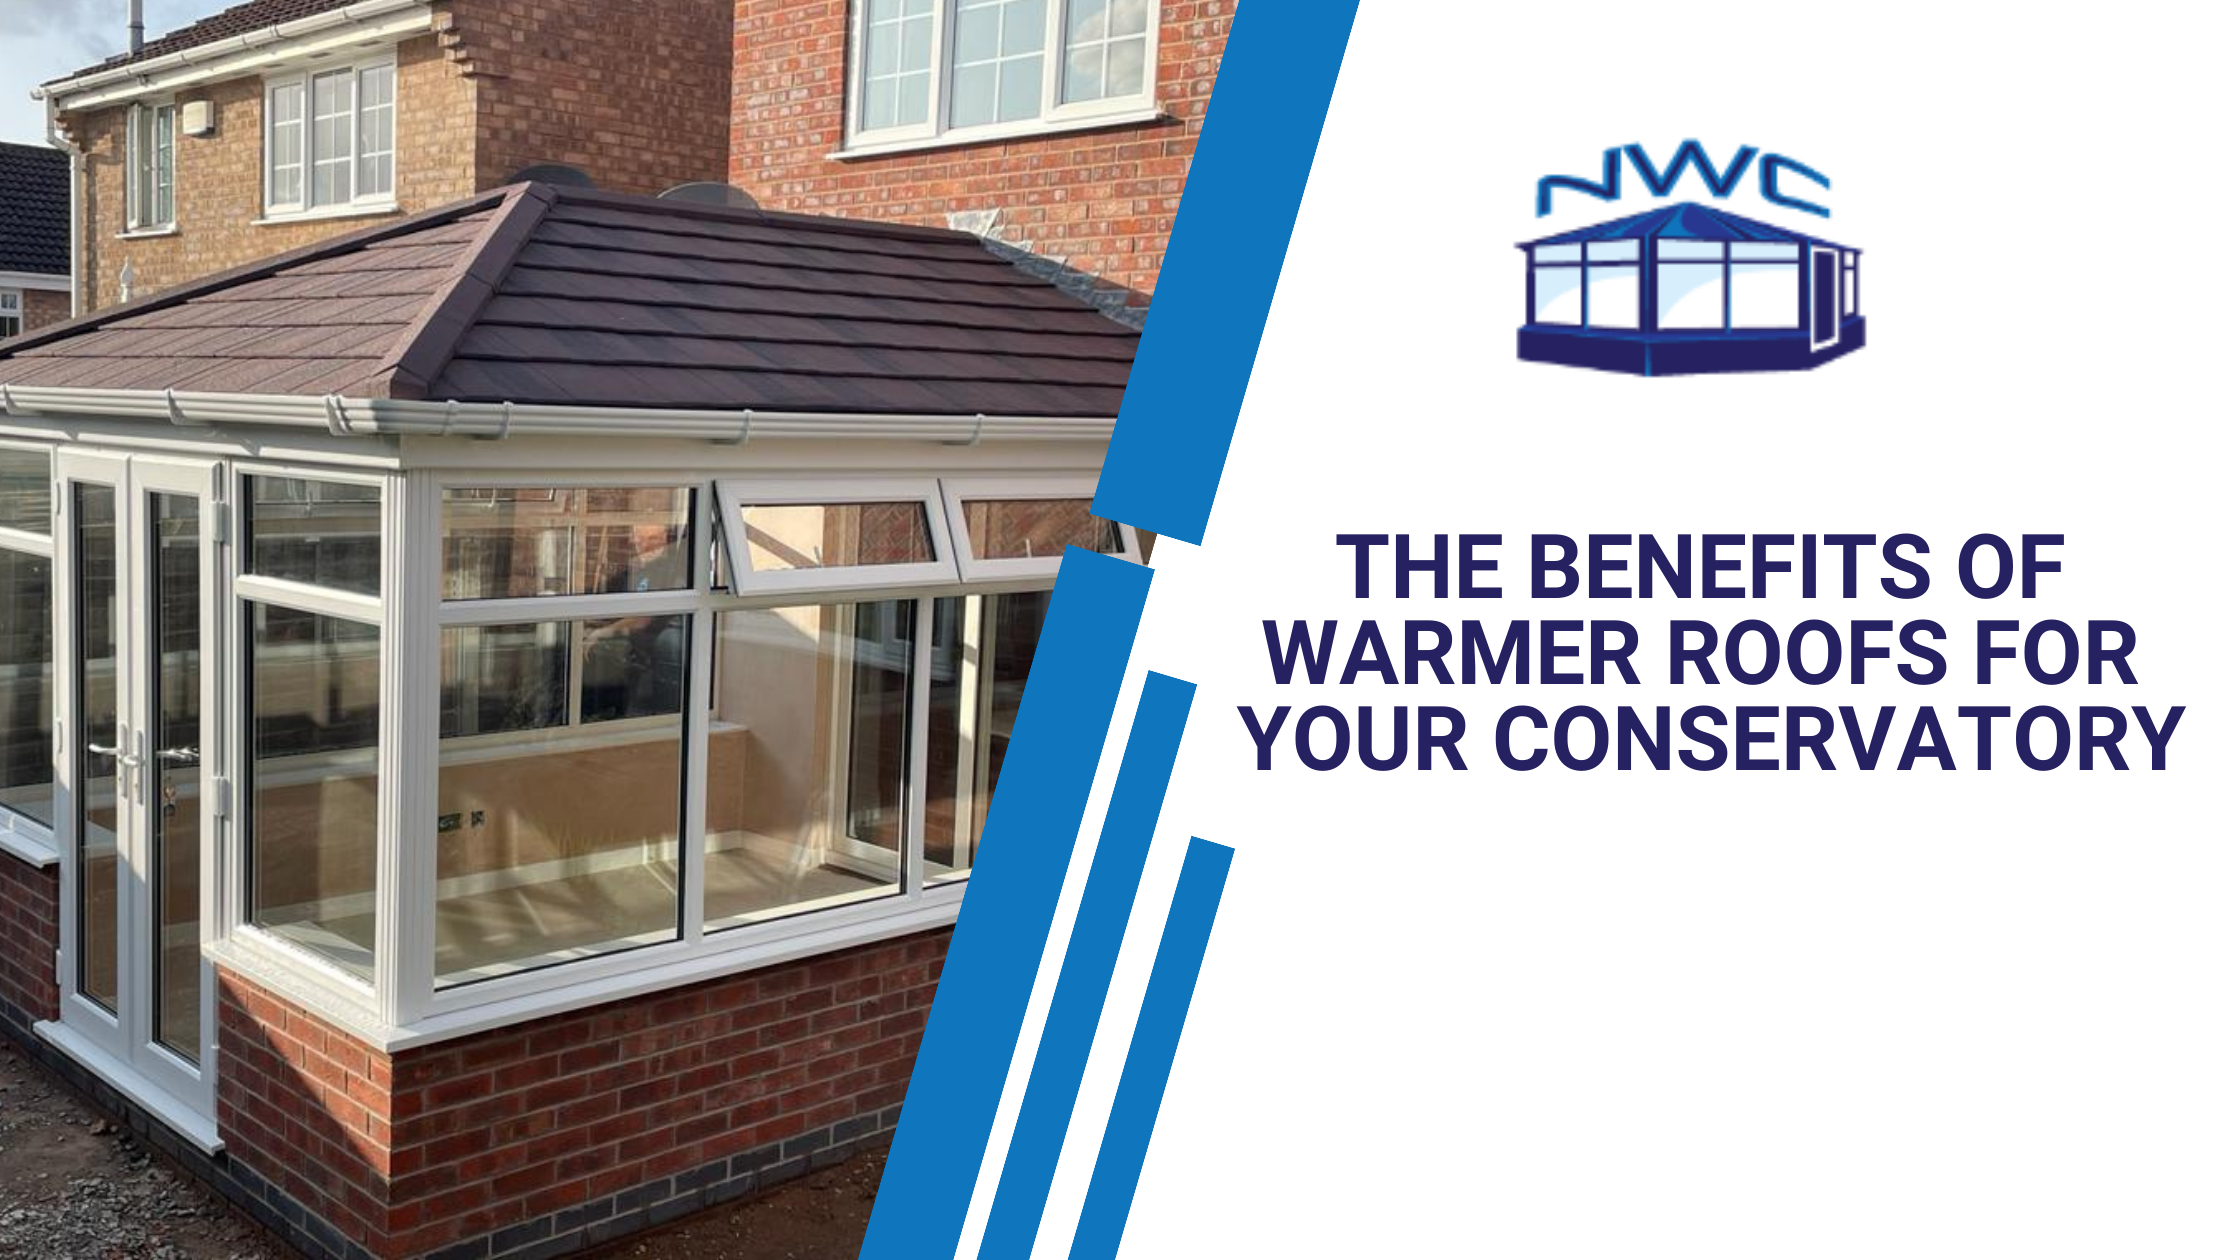 The benefits of a WarmRoof